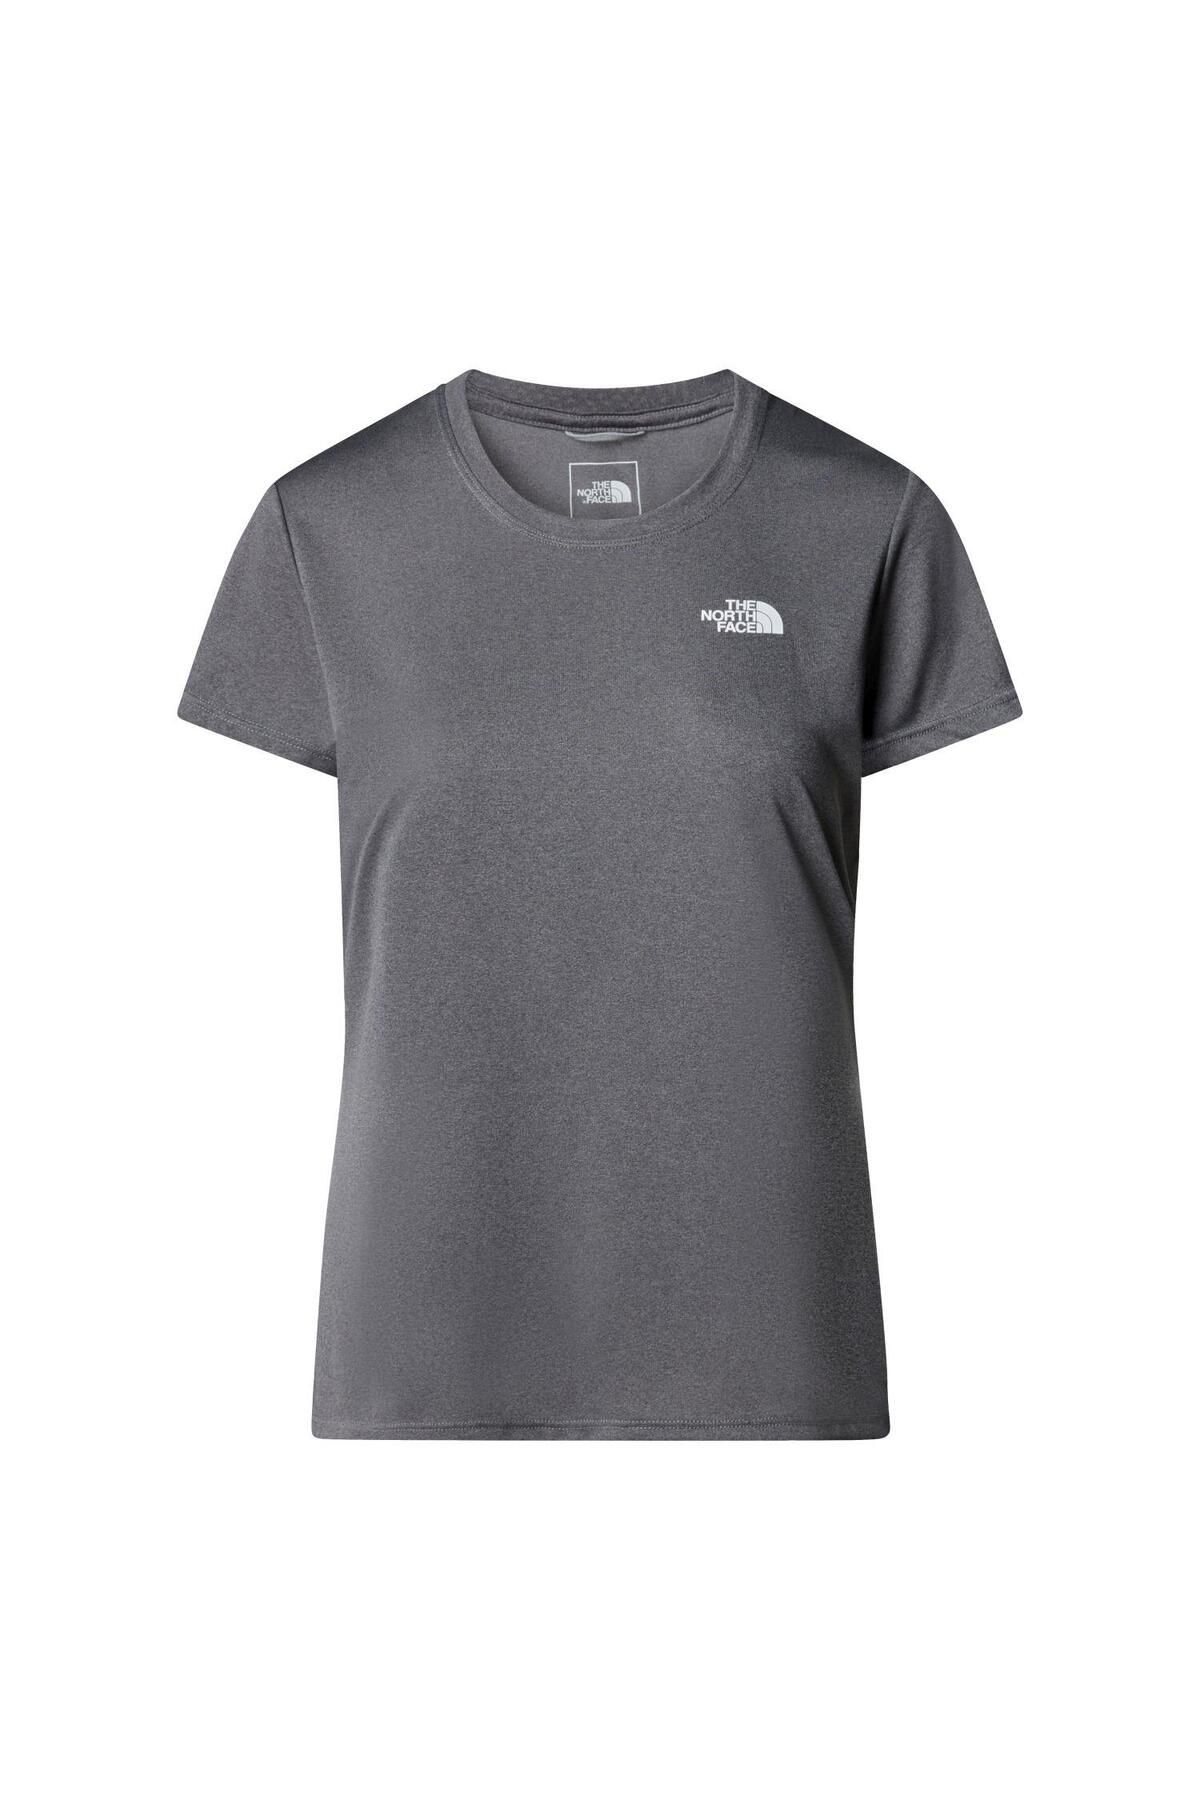 The North Face W REAXION AMP CREW - EU  T-Shirt NF00CE0T0V31 Gri-S